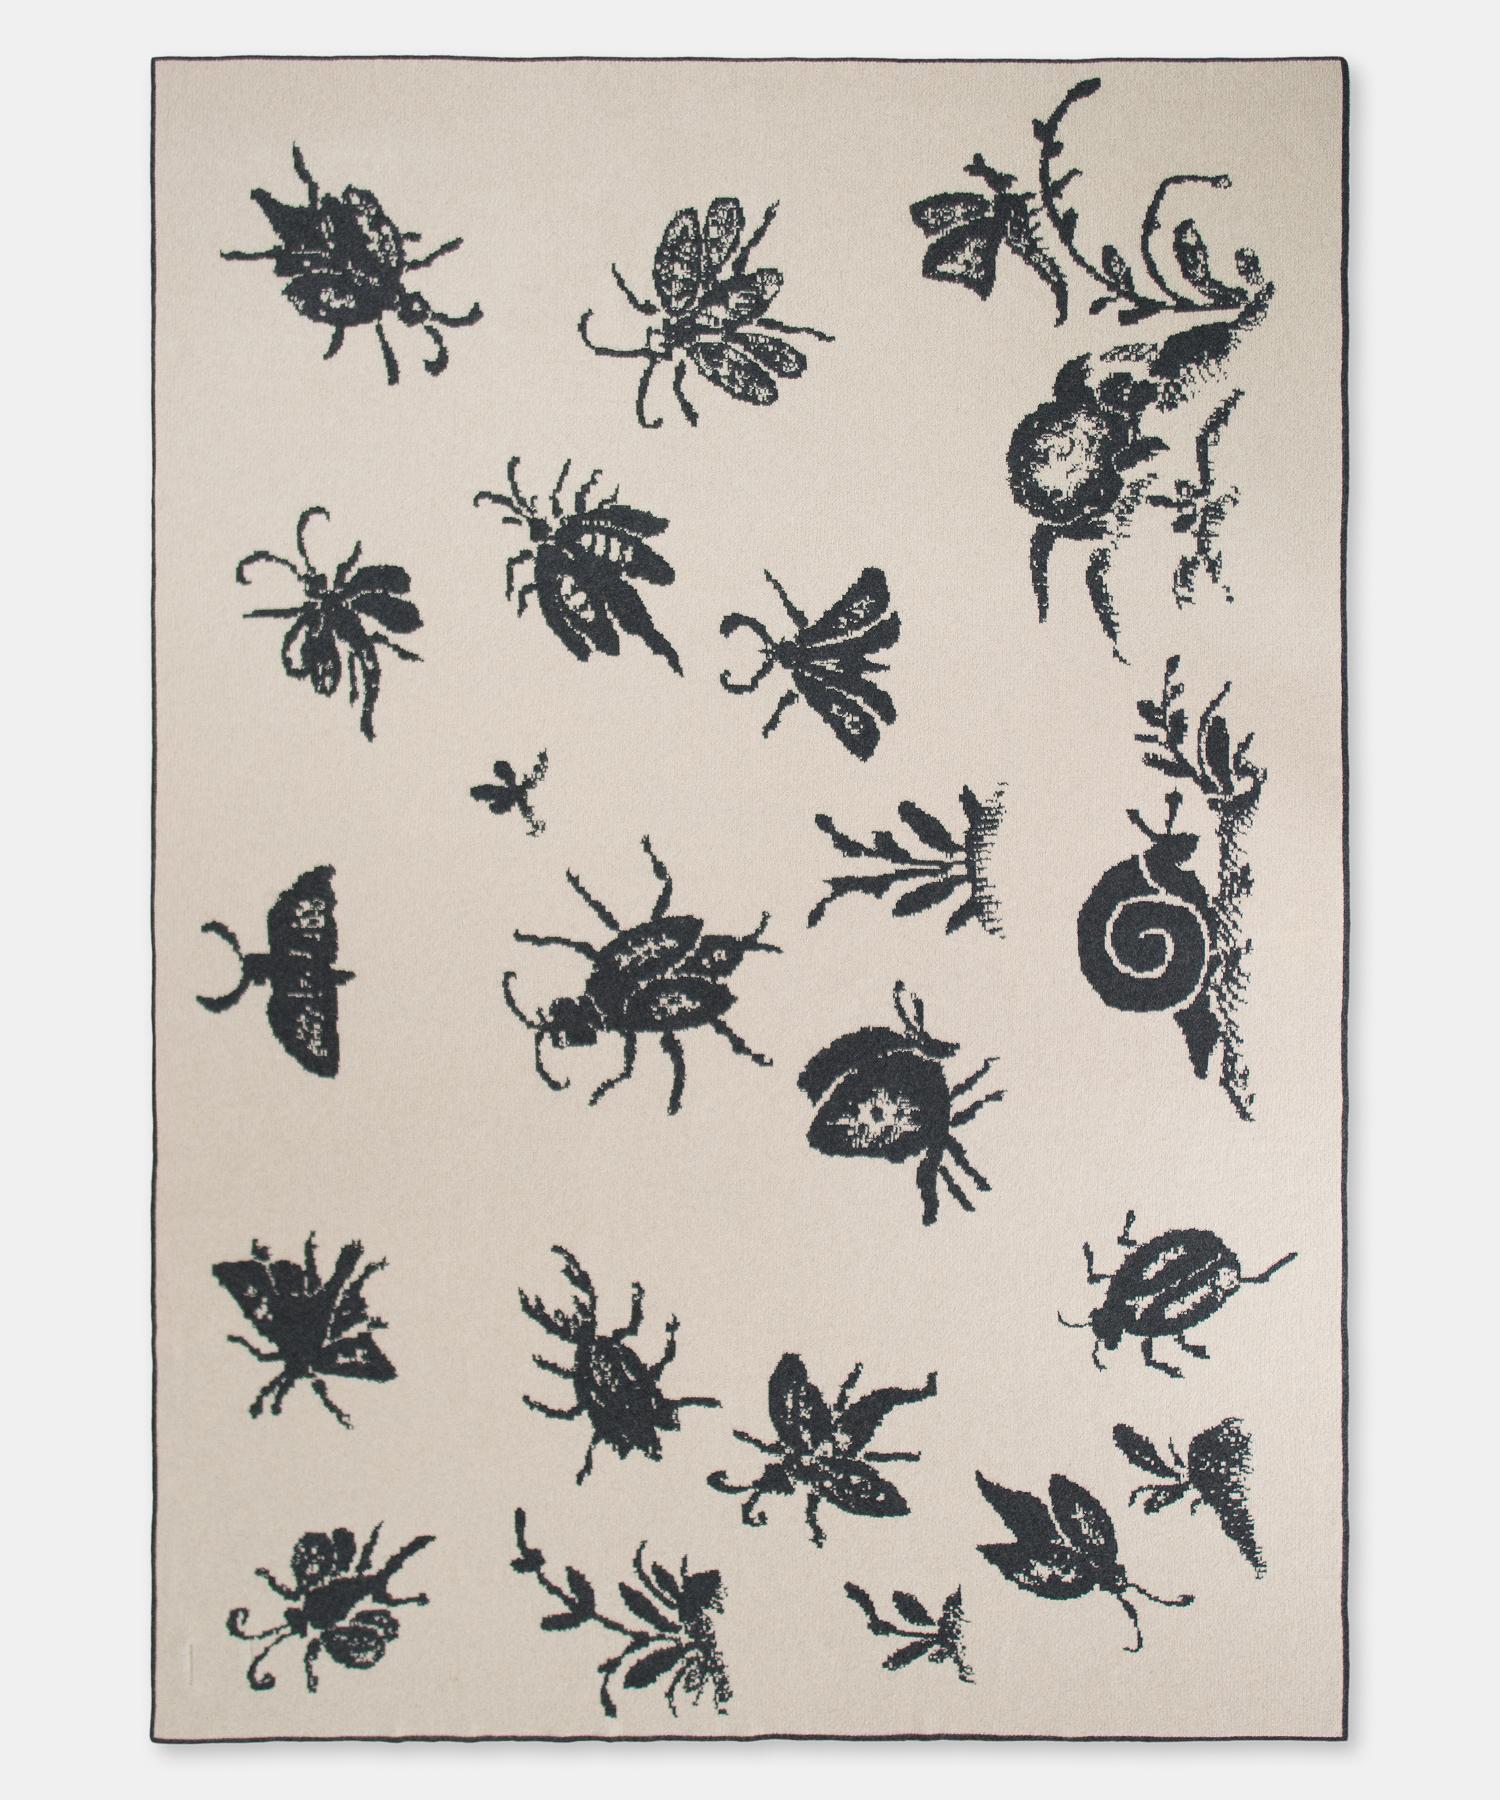 Garden throw by Saved, New York

Taking inspiration from black and white Italian prints and engravings of the 16th century, a scene includes creatures of the garden. Available in King and Queen sizes, please inquire for pricing, availability, and